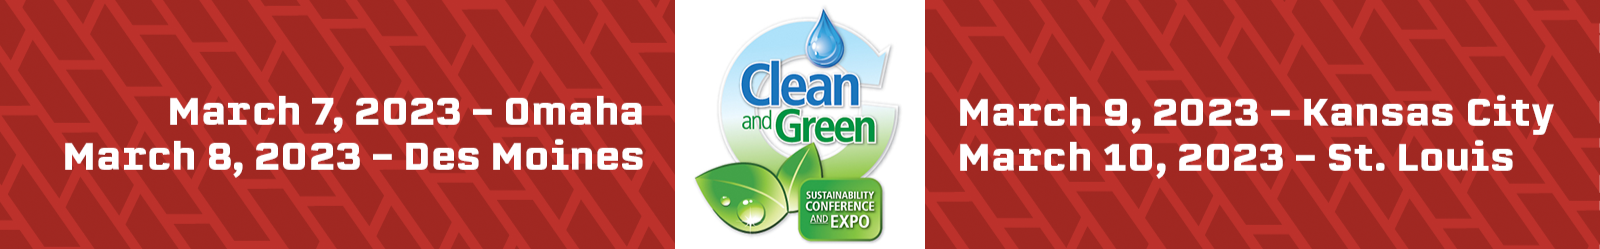 ASP's Clean & Green Sustainability Conference 